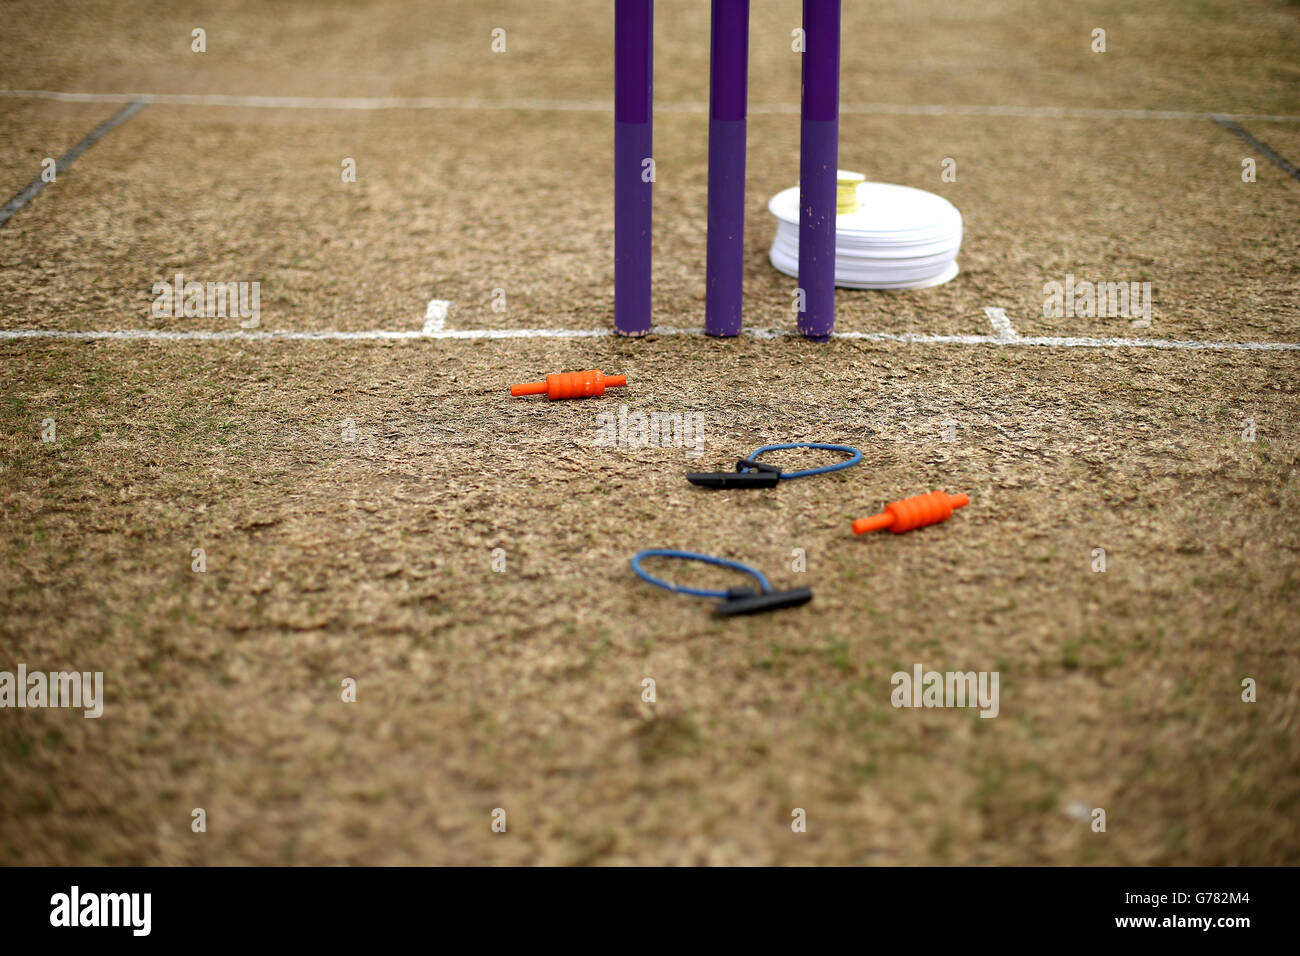 Cricket - Royal London One Day Cup - Surrey v Glamorgan - Guildford Cricket Club. Detail of cricket stumps and bails Stock Photo